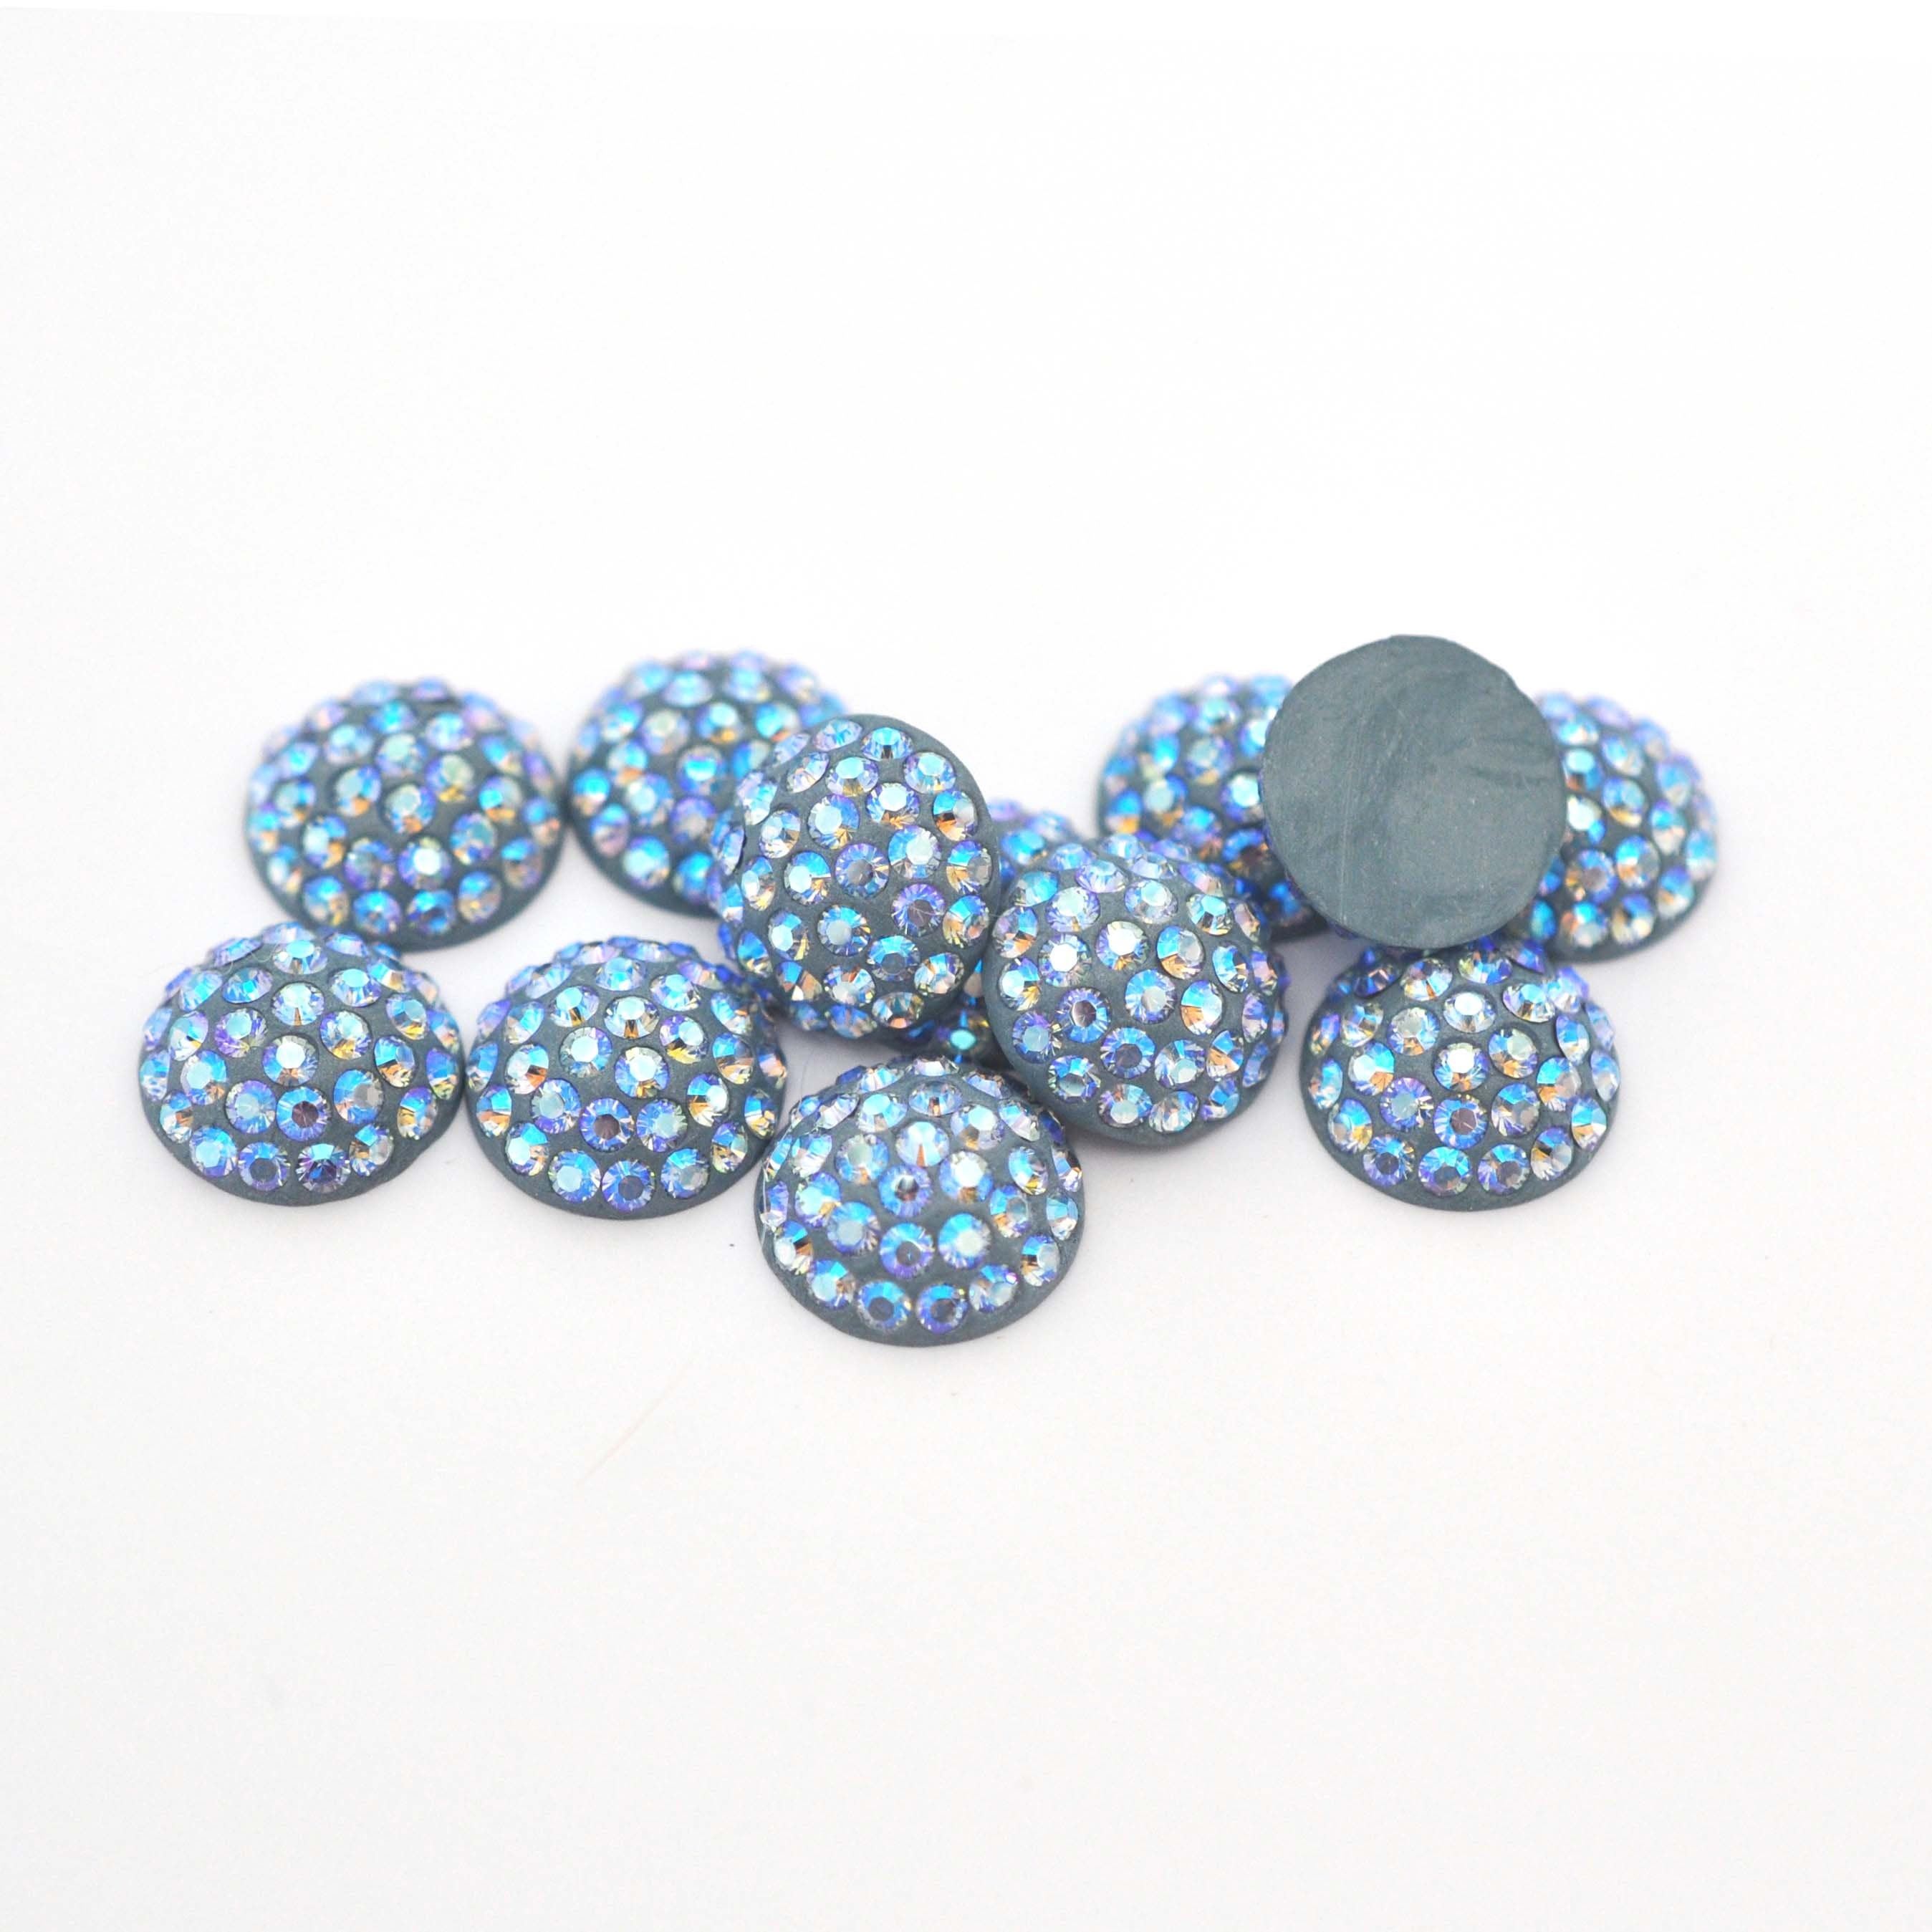 Light Sapphire Shimmer Pave Crystal Cabochon 86601 Barton Crystal 12mm